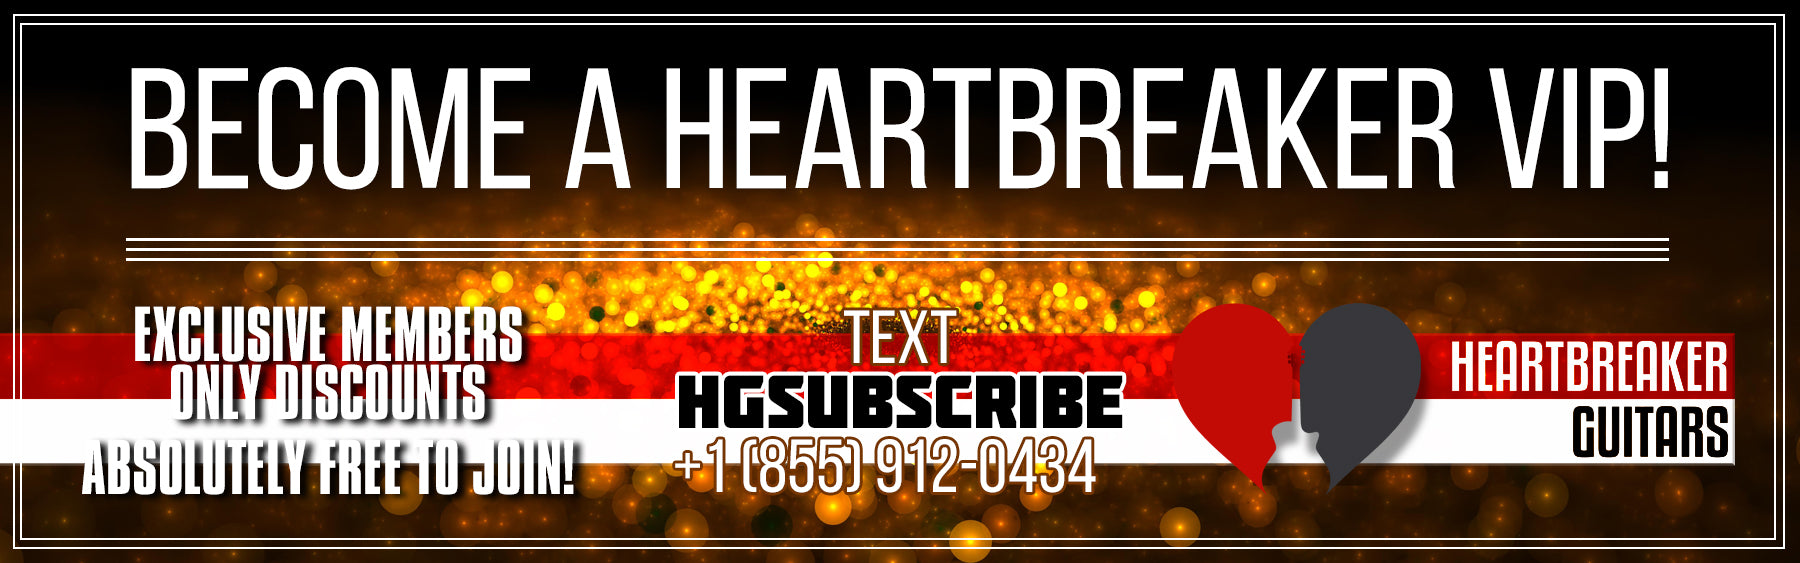 Become a Heartbreaker VIP!  Click to Join Now!